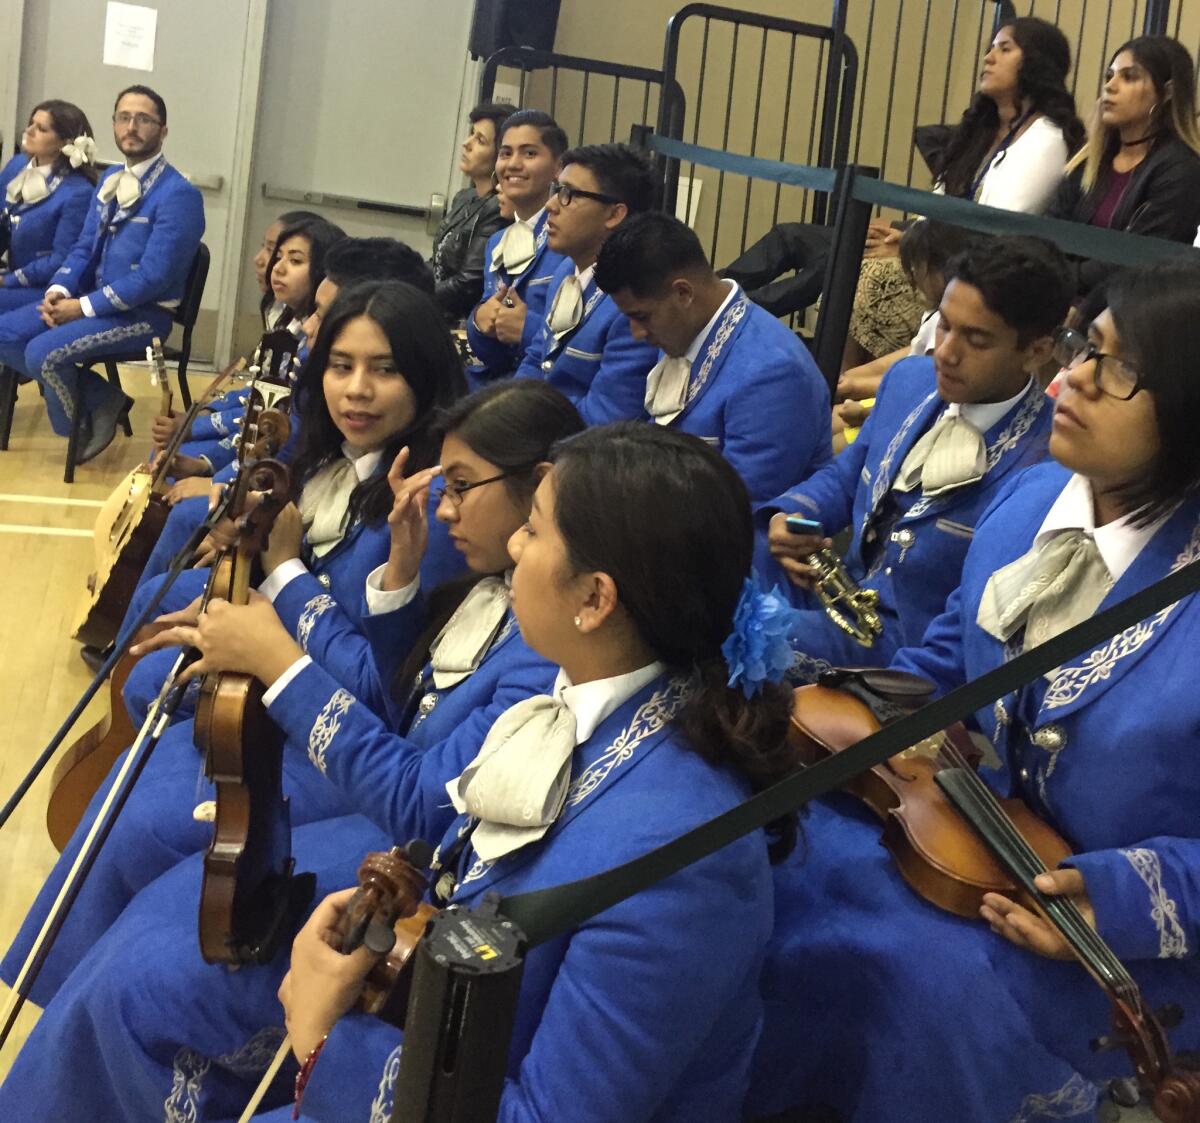 Members of Los Jaguares, the Mendez High School mariachi group, wait to perform at the graduation ceremony.